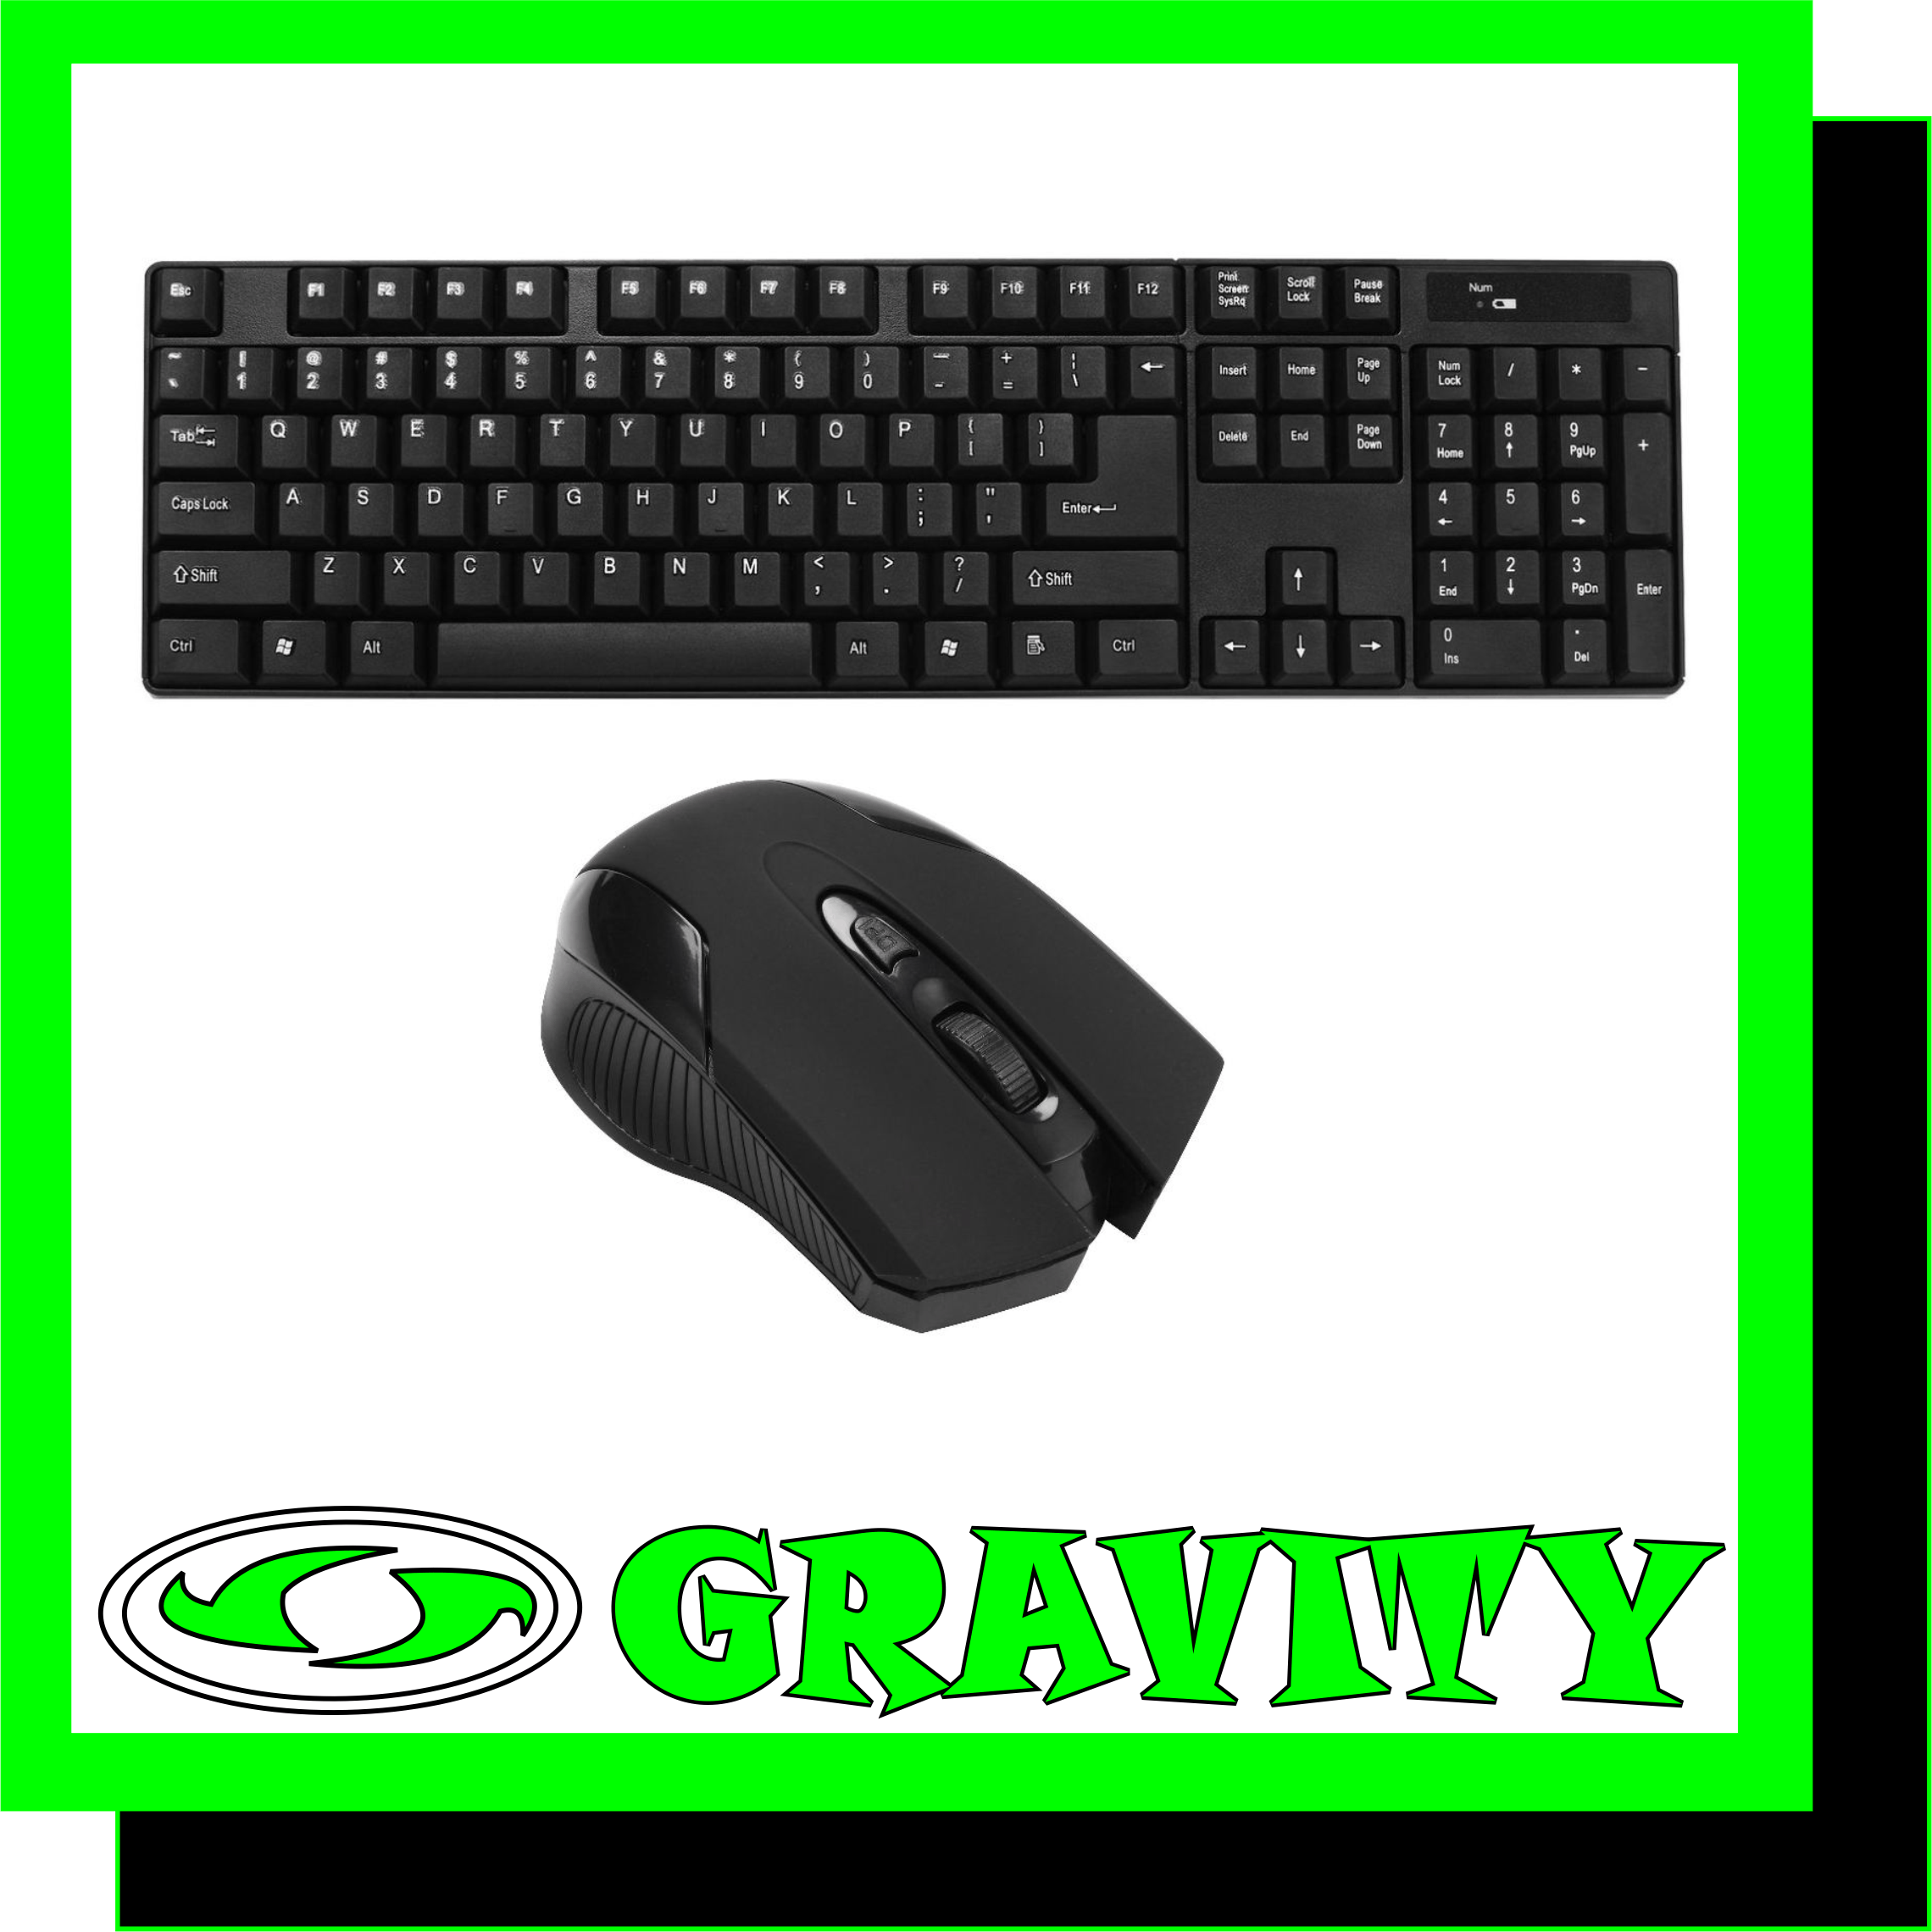 Keyboard + Optical Mouse Combo 2.4GHz RF Technology  USB Dongle Connectivity 10m Working Range Battery Powered  Windows, Mac, Compatible